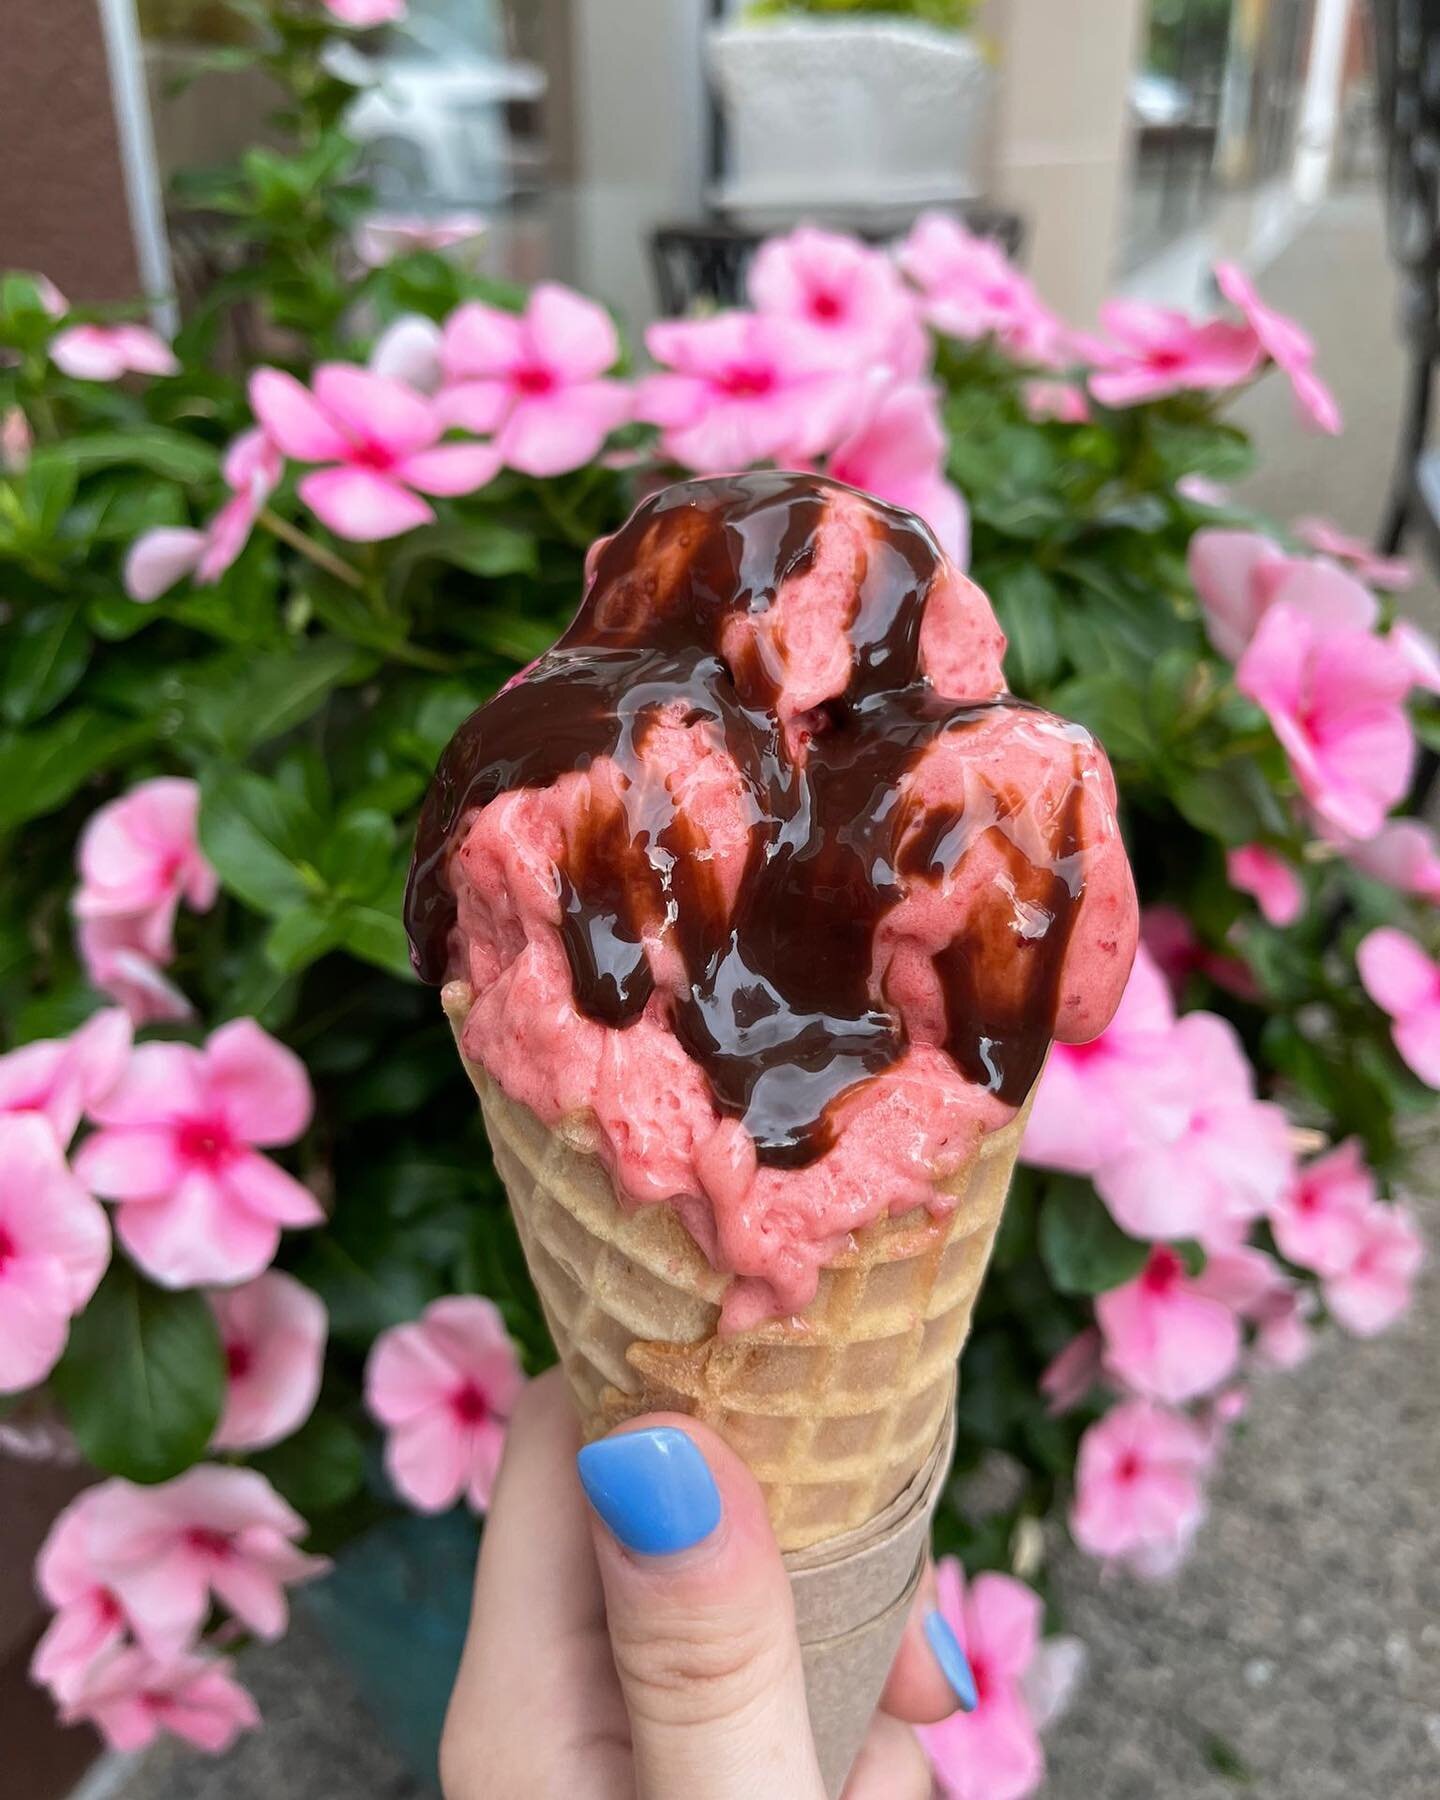 Try our new feature&mdash;chocolate sauce! 🌸 This one here in on top of our Strawberry 🍓 Sorbet (naturally vegan)!
.
.
.
.
#gelato #atlanta #dessert #icecream #vegan